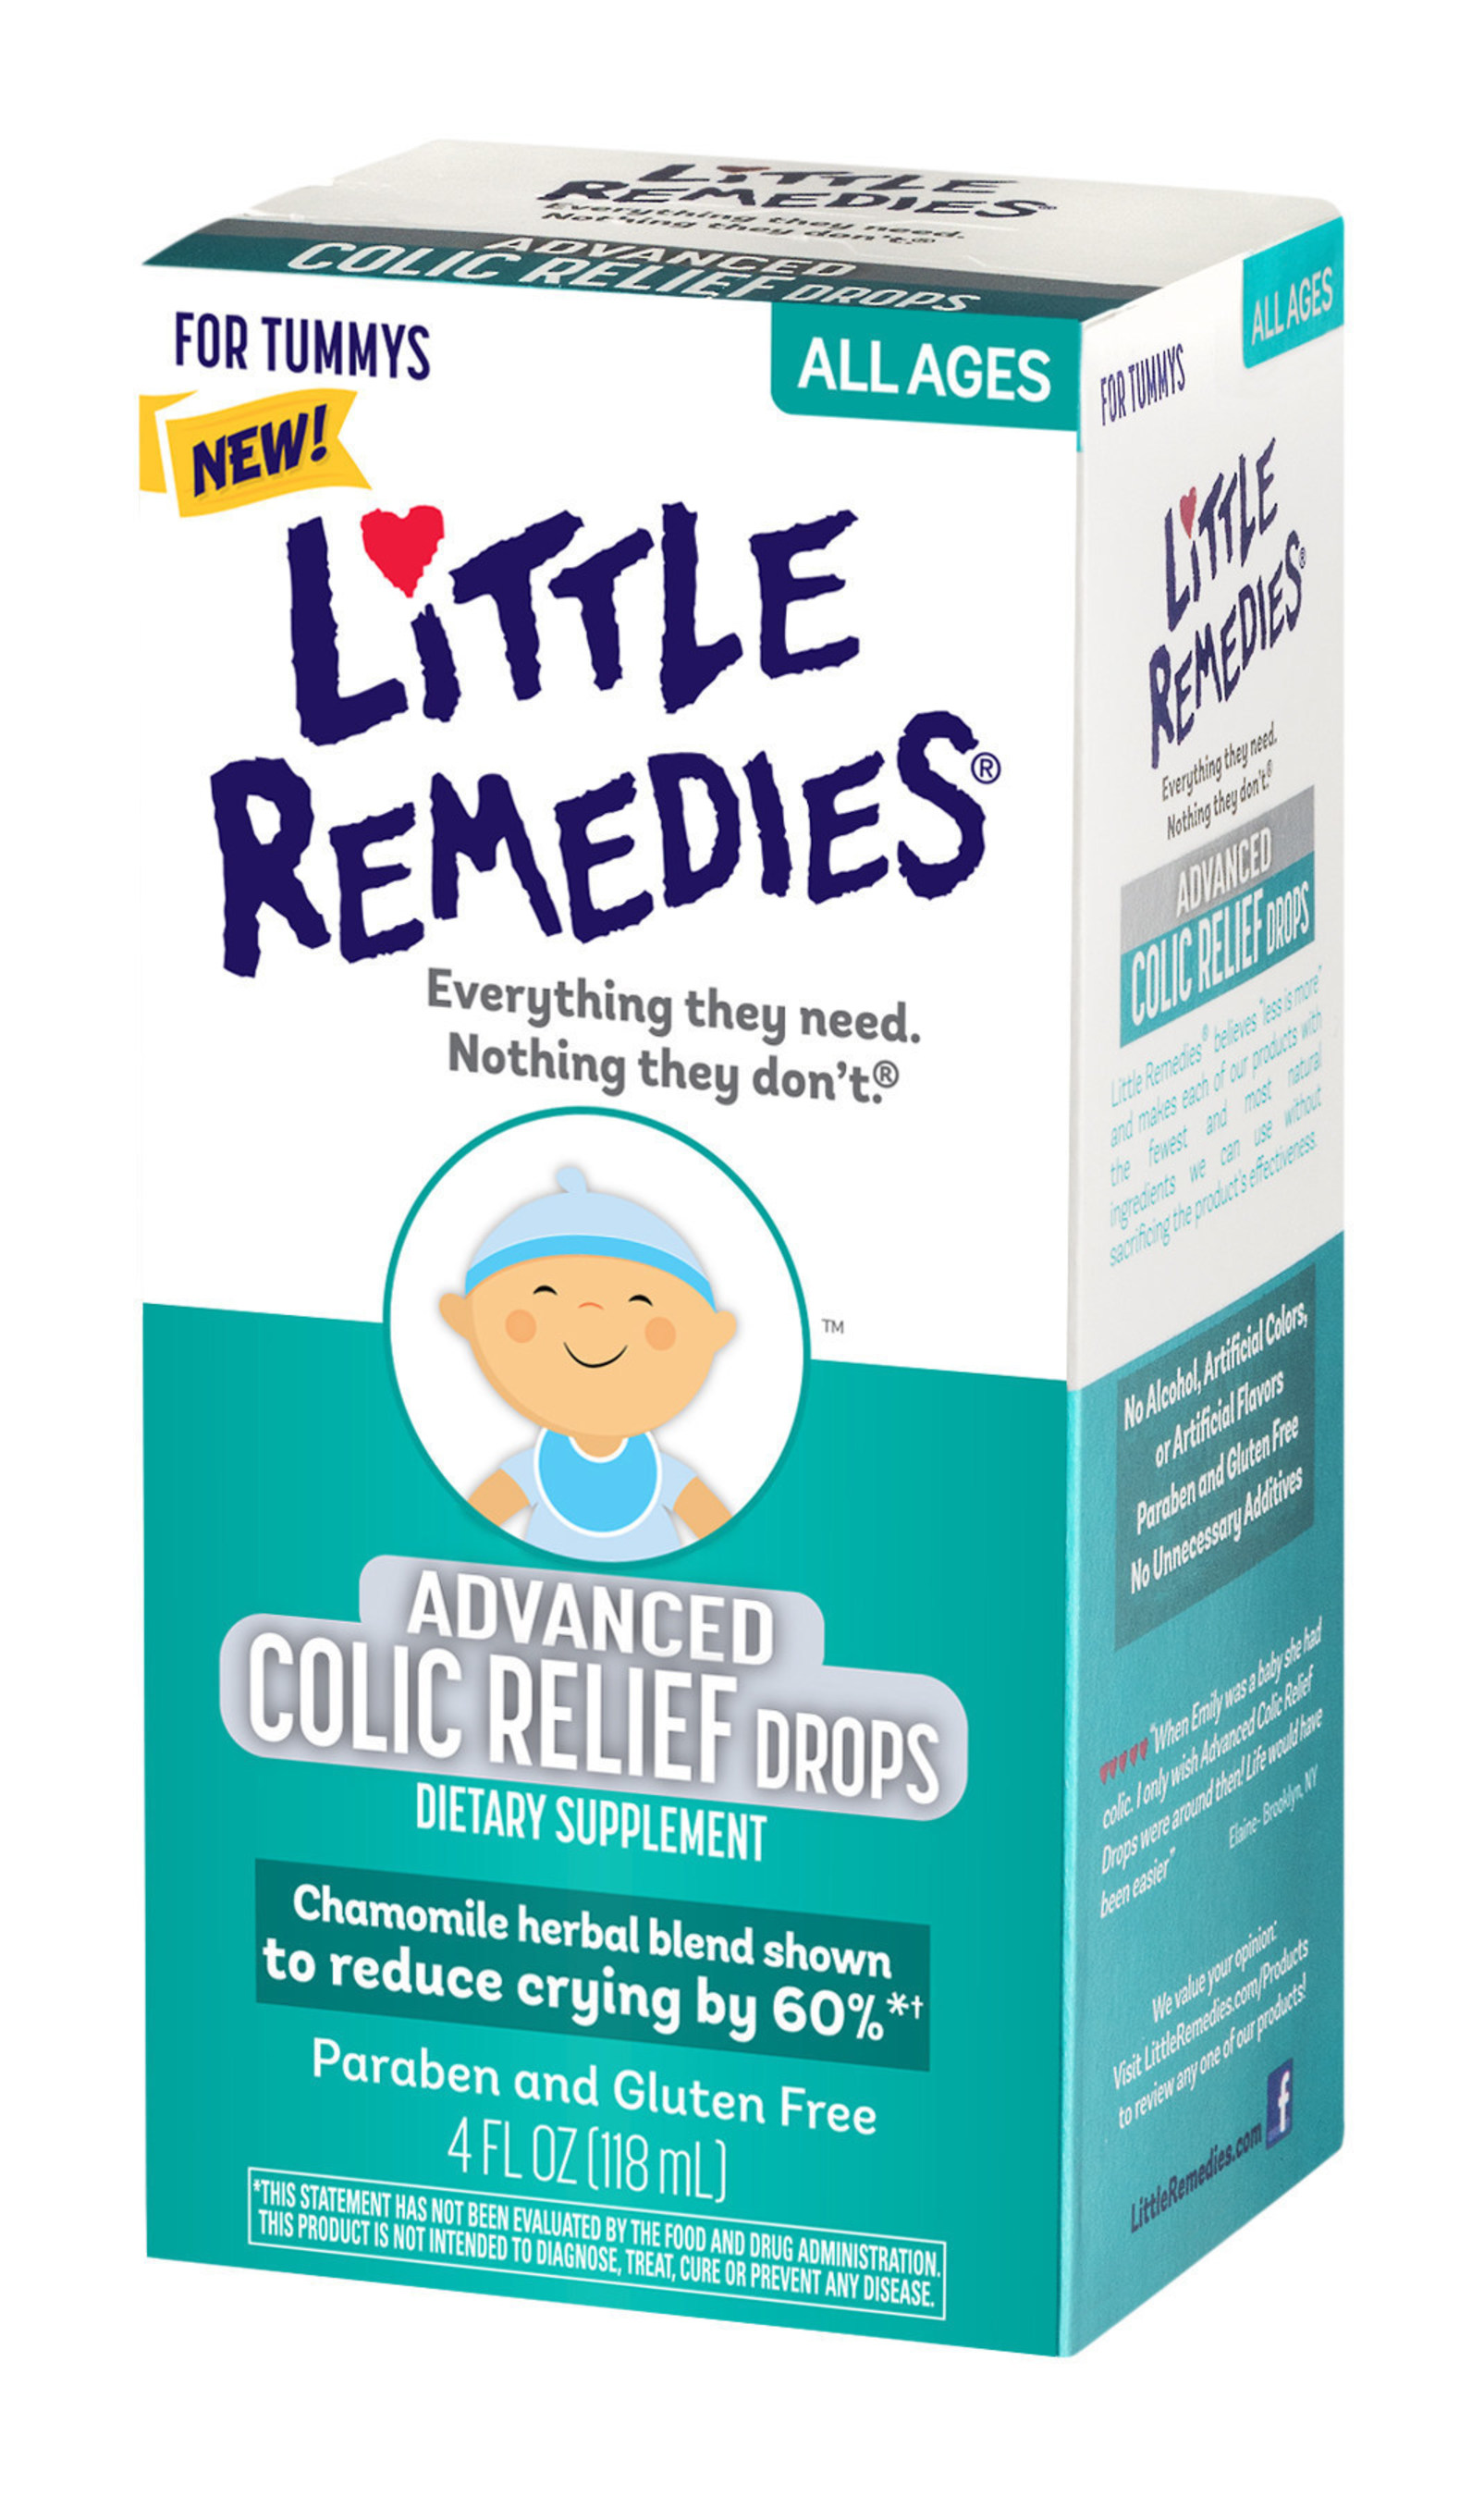 Colic Relief Product For Infants